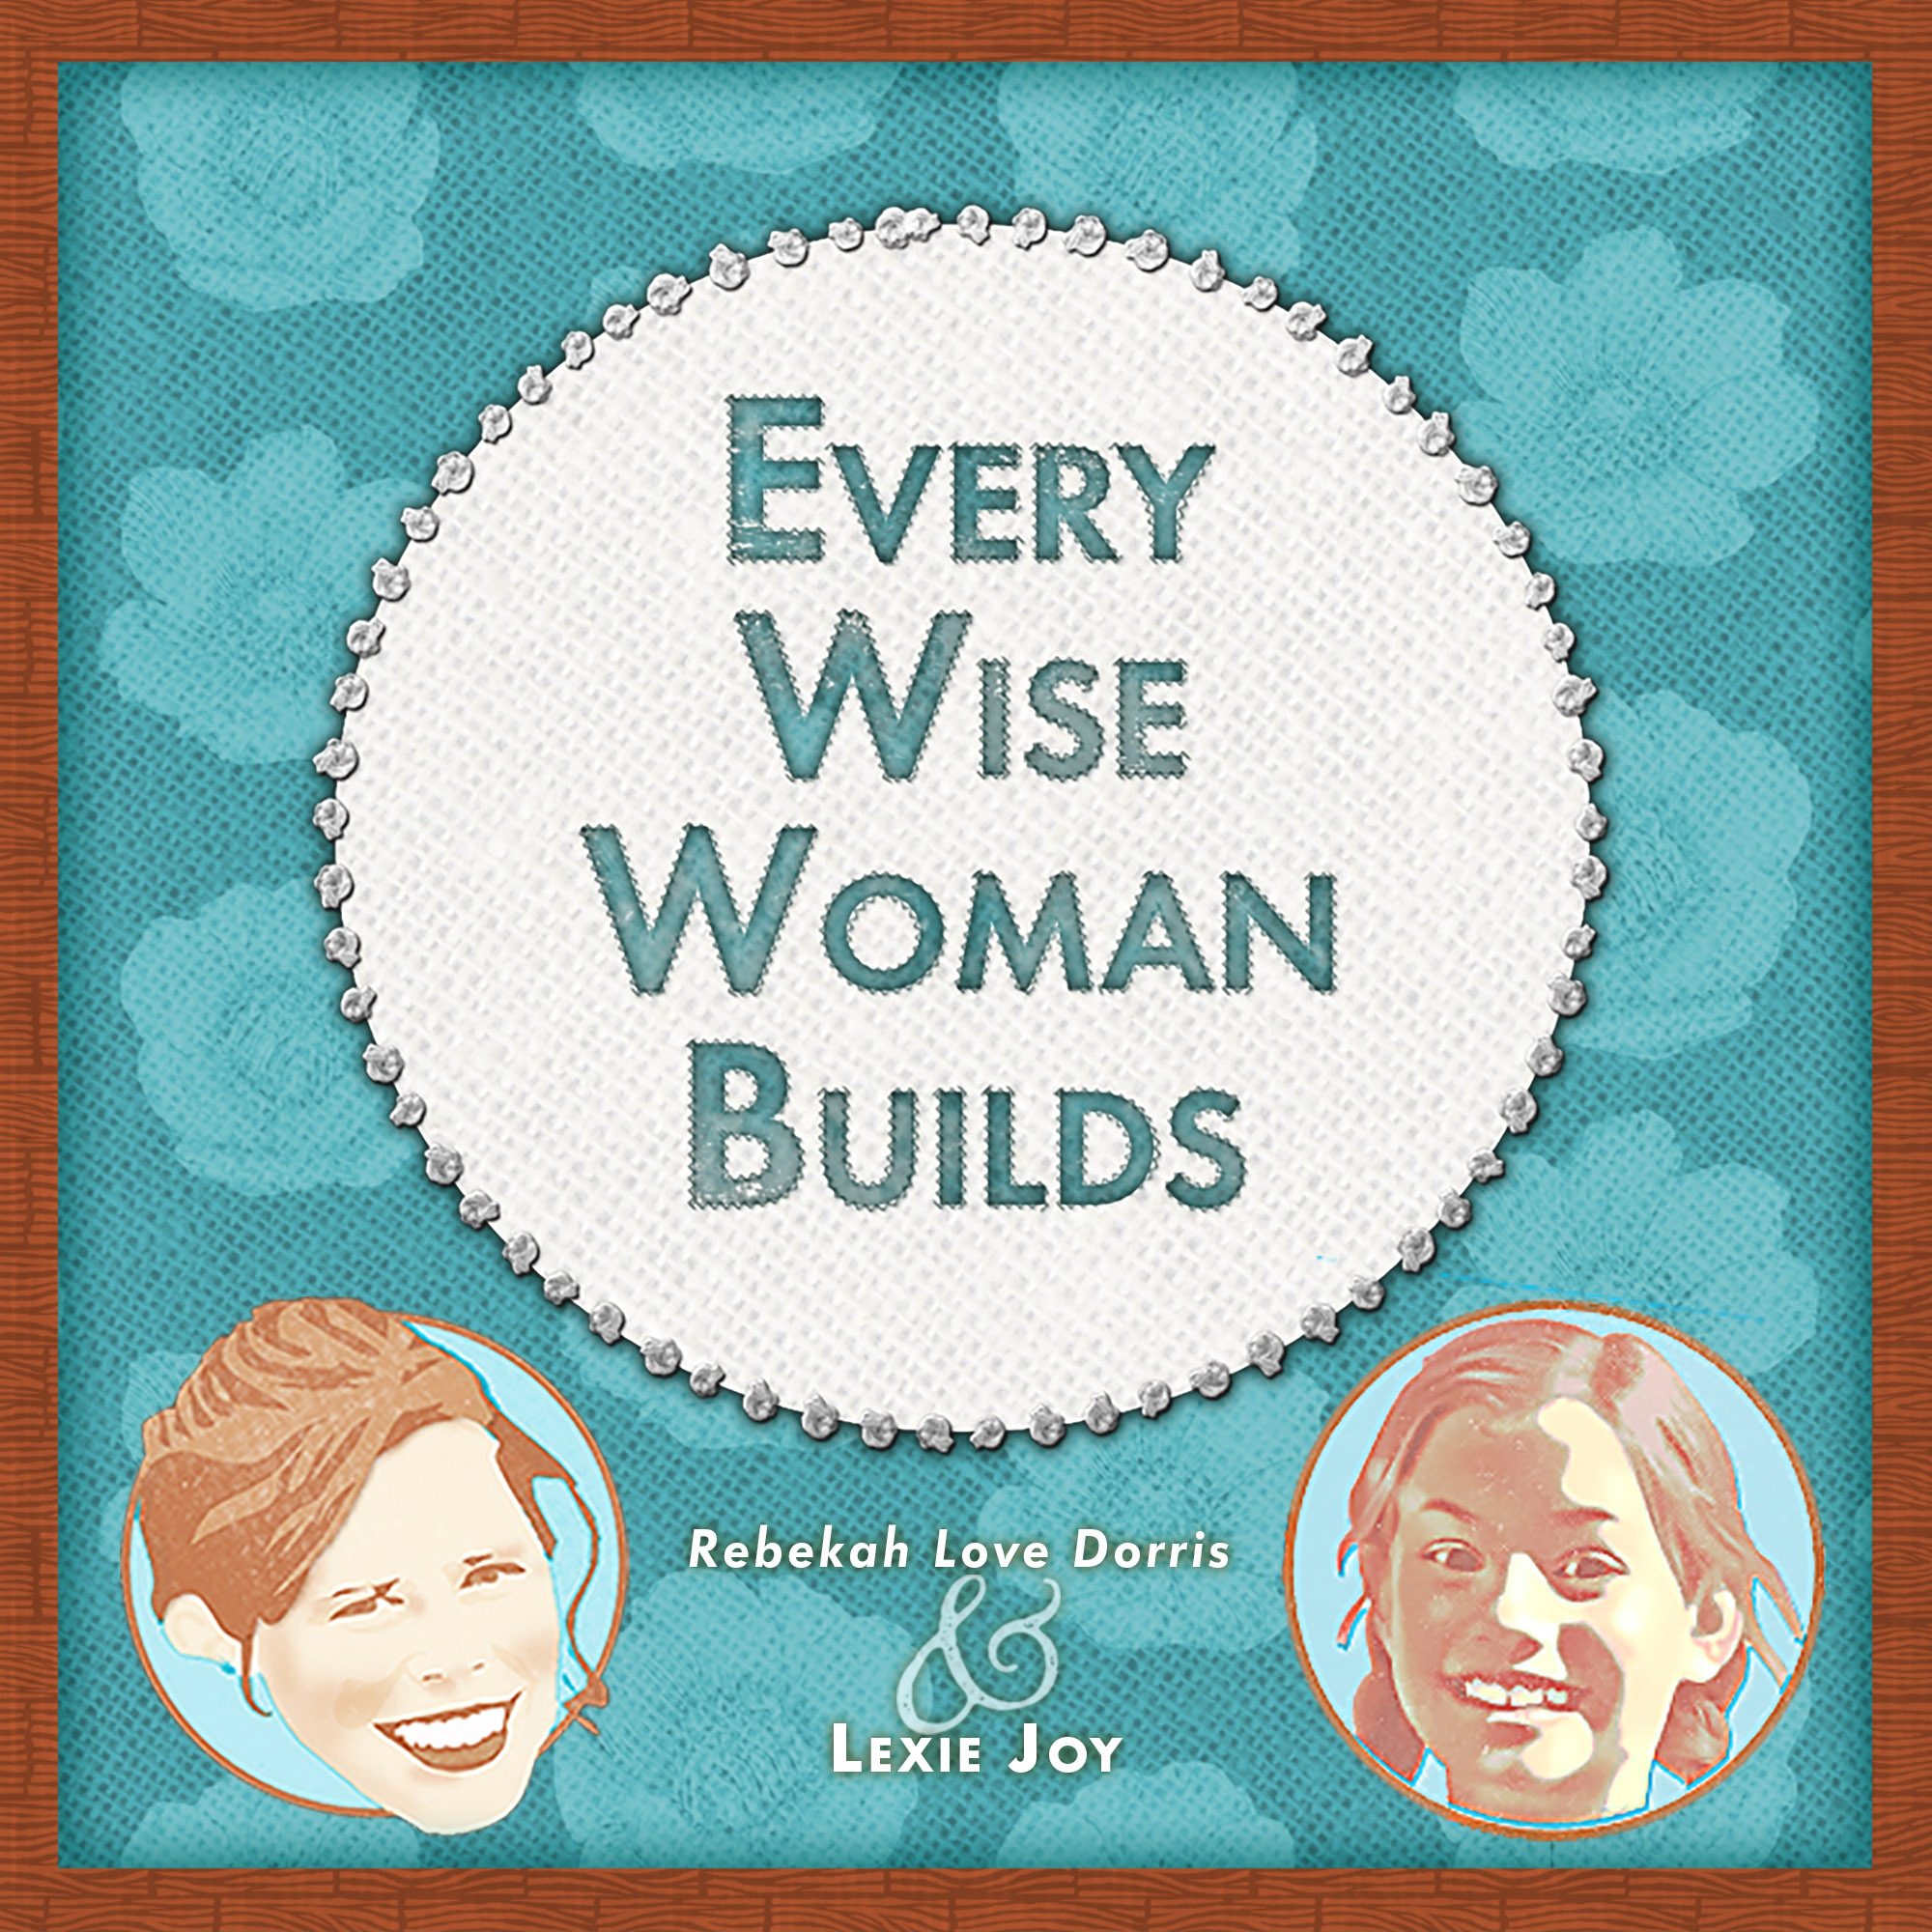 Introducing Every Wise Woman Builds